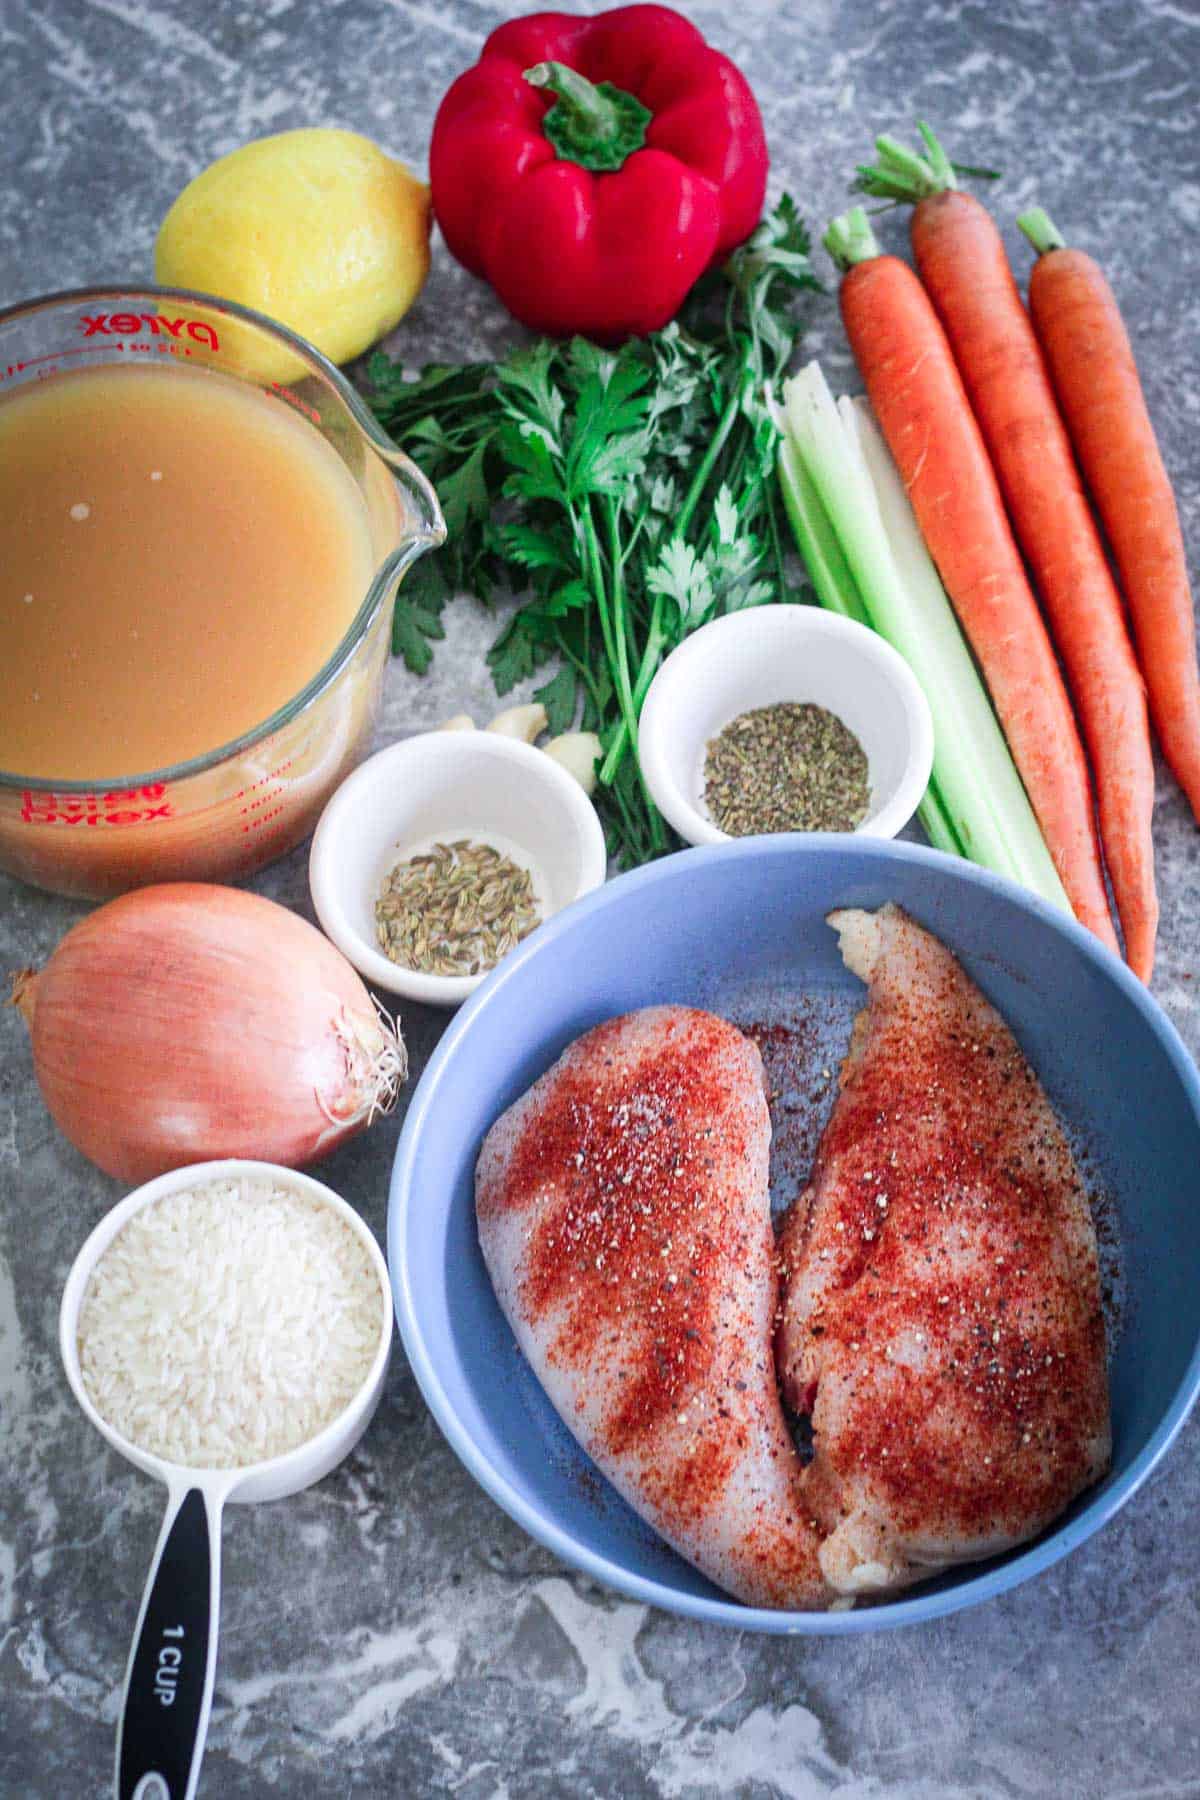 Ingredients for chicken and rice soup: broth, lemon, red pepper, carrots, celery, parsley, fennel seeds, Italian seasoning, yellow onion, rice and seasoned chicken breasts.